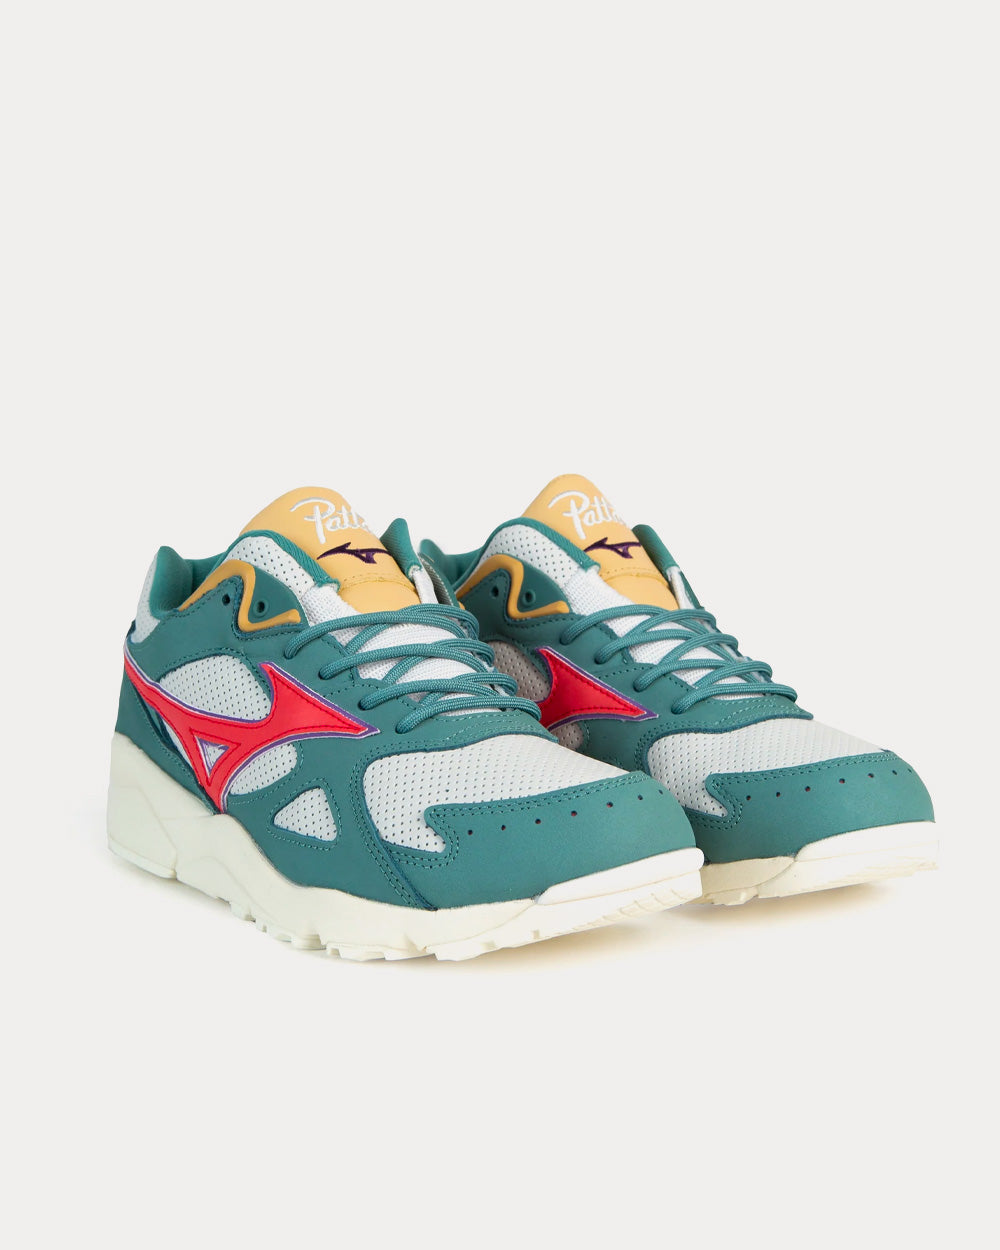 Mizuno x Patta Sky Medal Ivory / Red / Green Low Top Sneakers ...